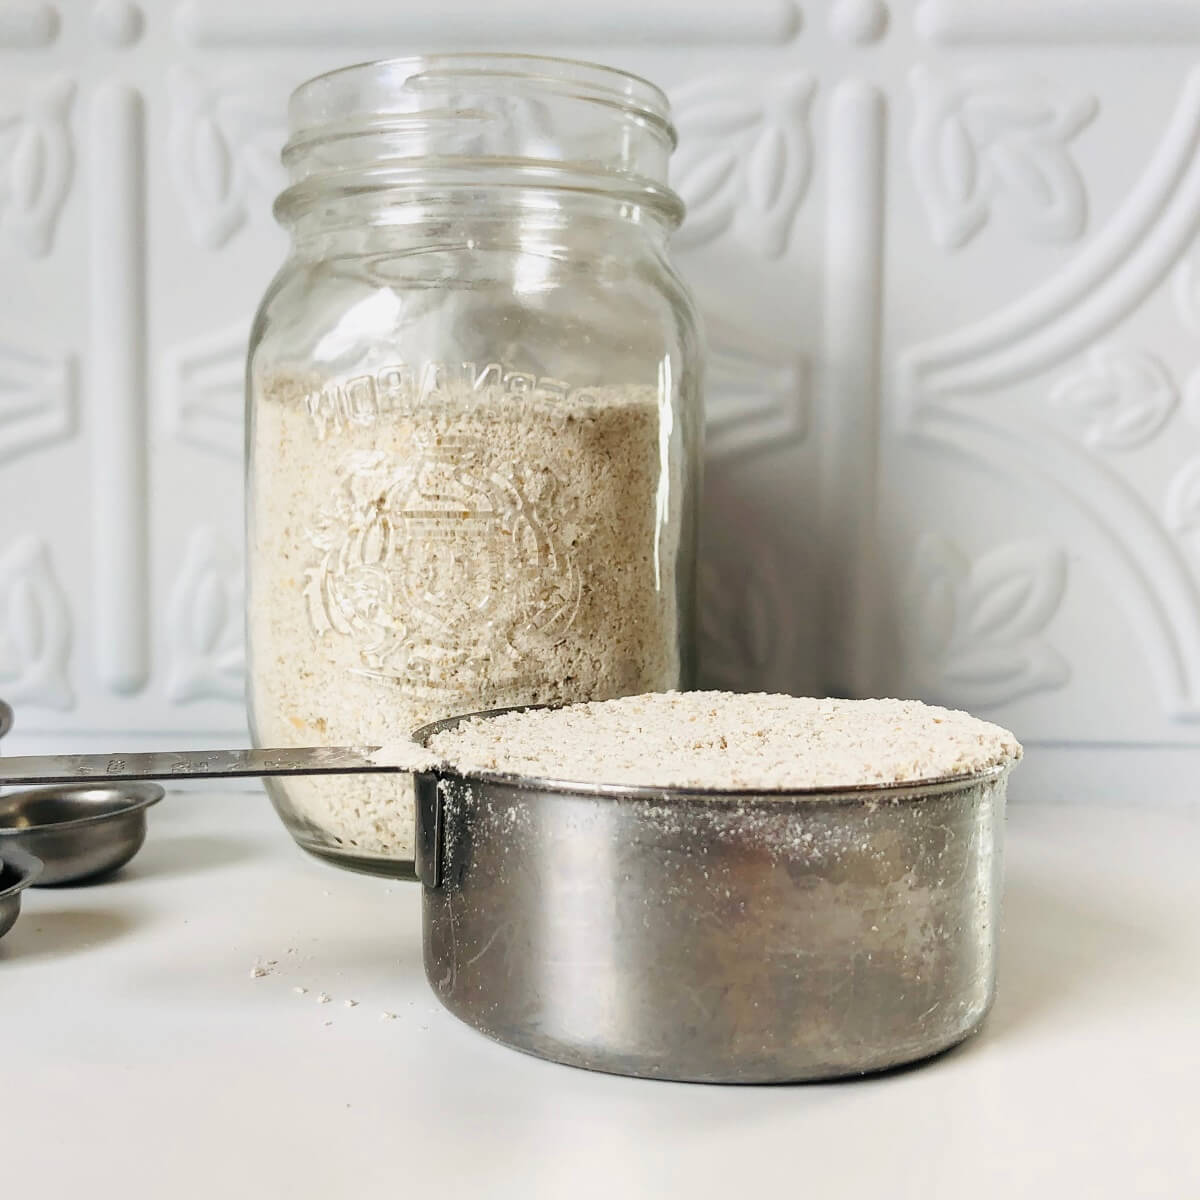 Oat flour in a measuring cup in front of a glass mason jar filled with oat flour.